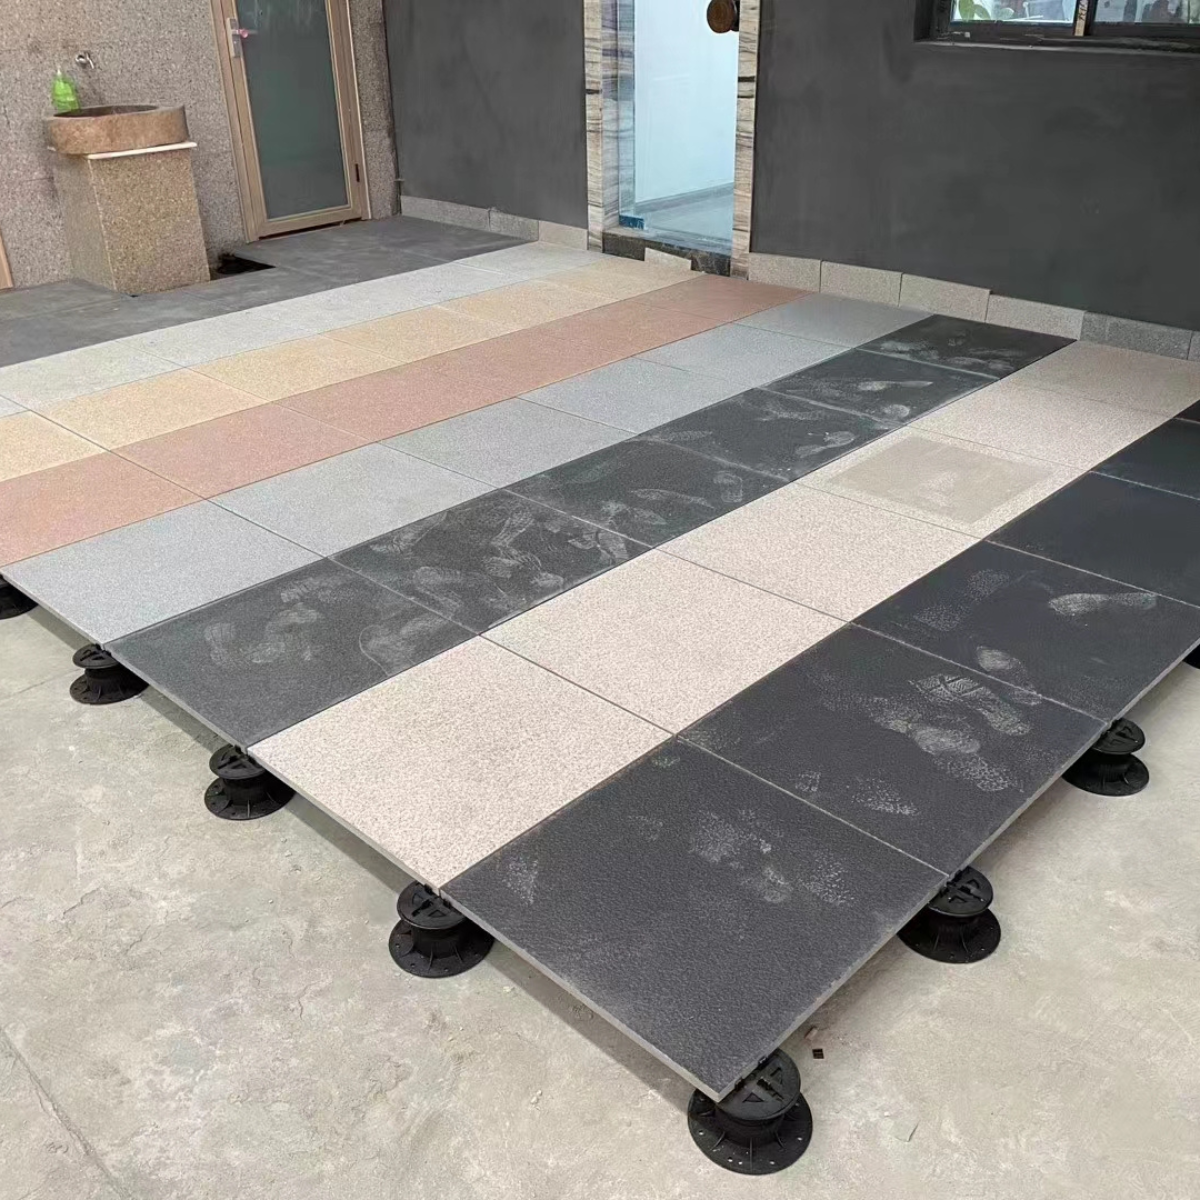 CX Floor support Universal adjustable support Stone tile paving Anticorrosive wood floor support Indoor booth construction